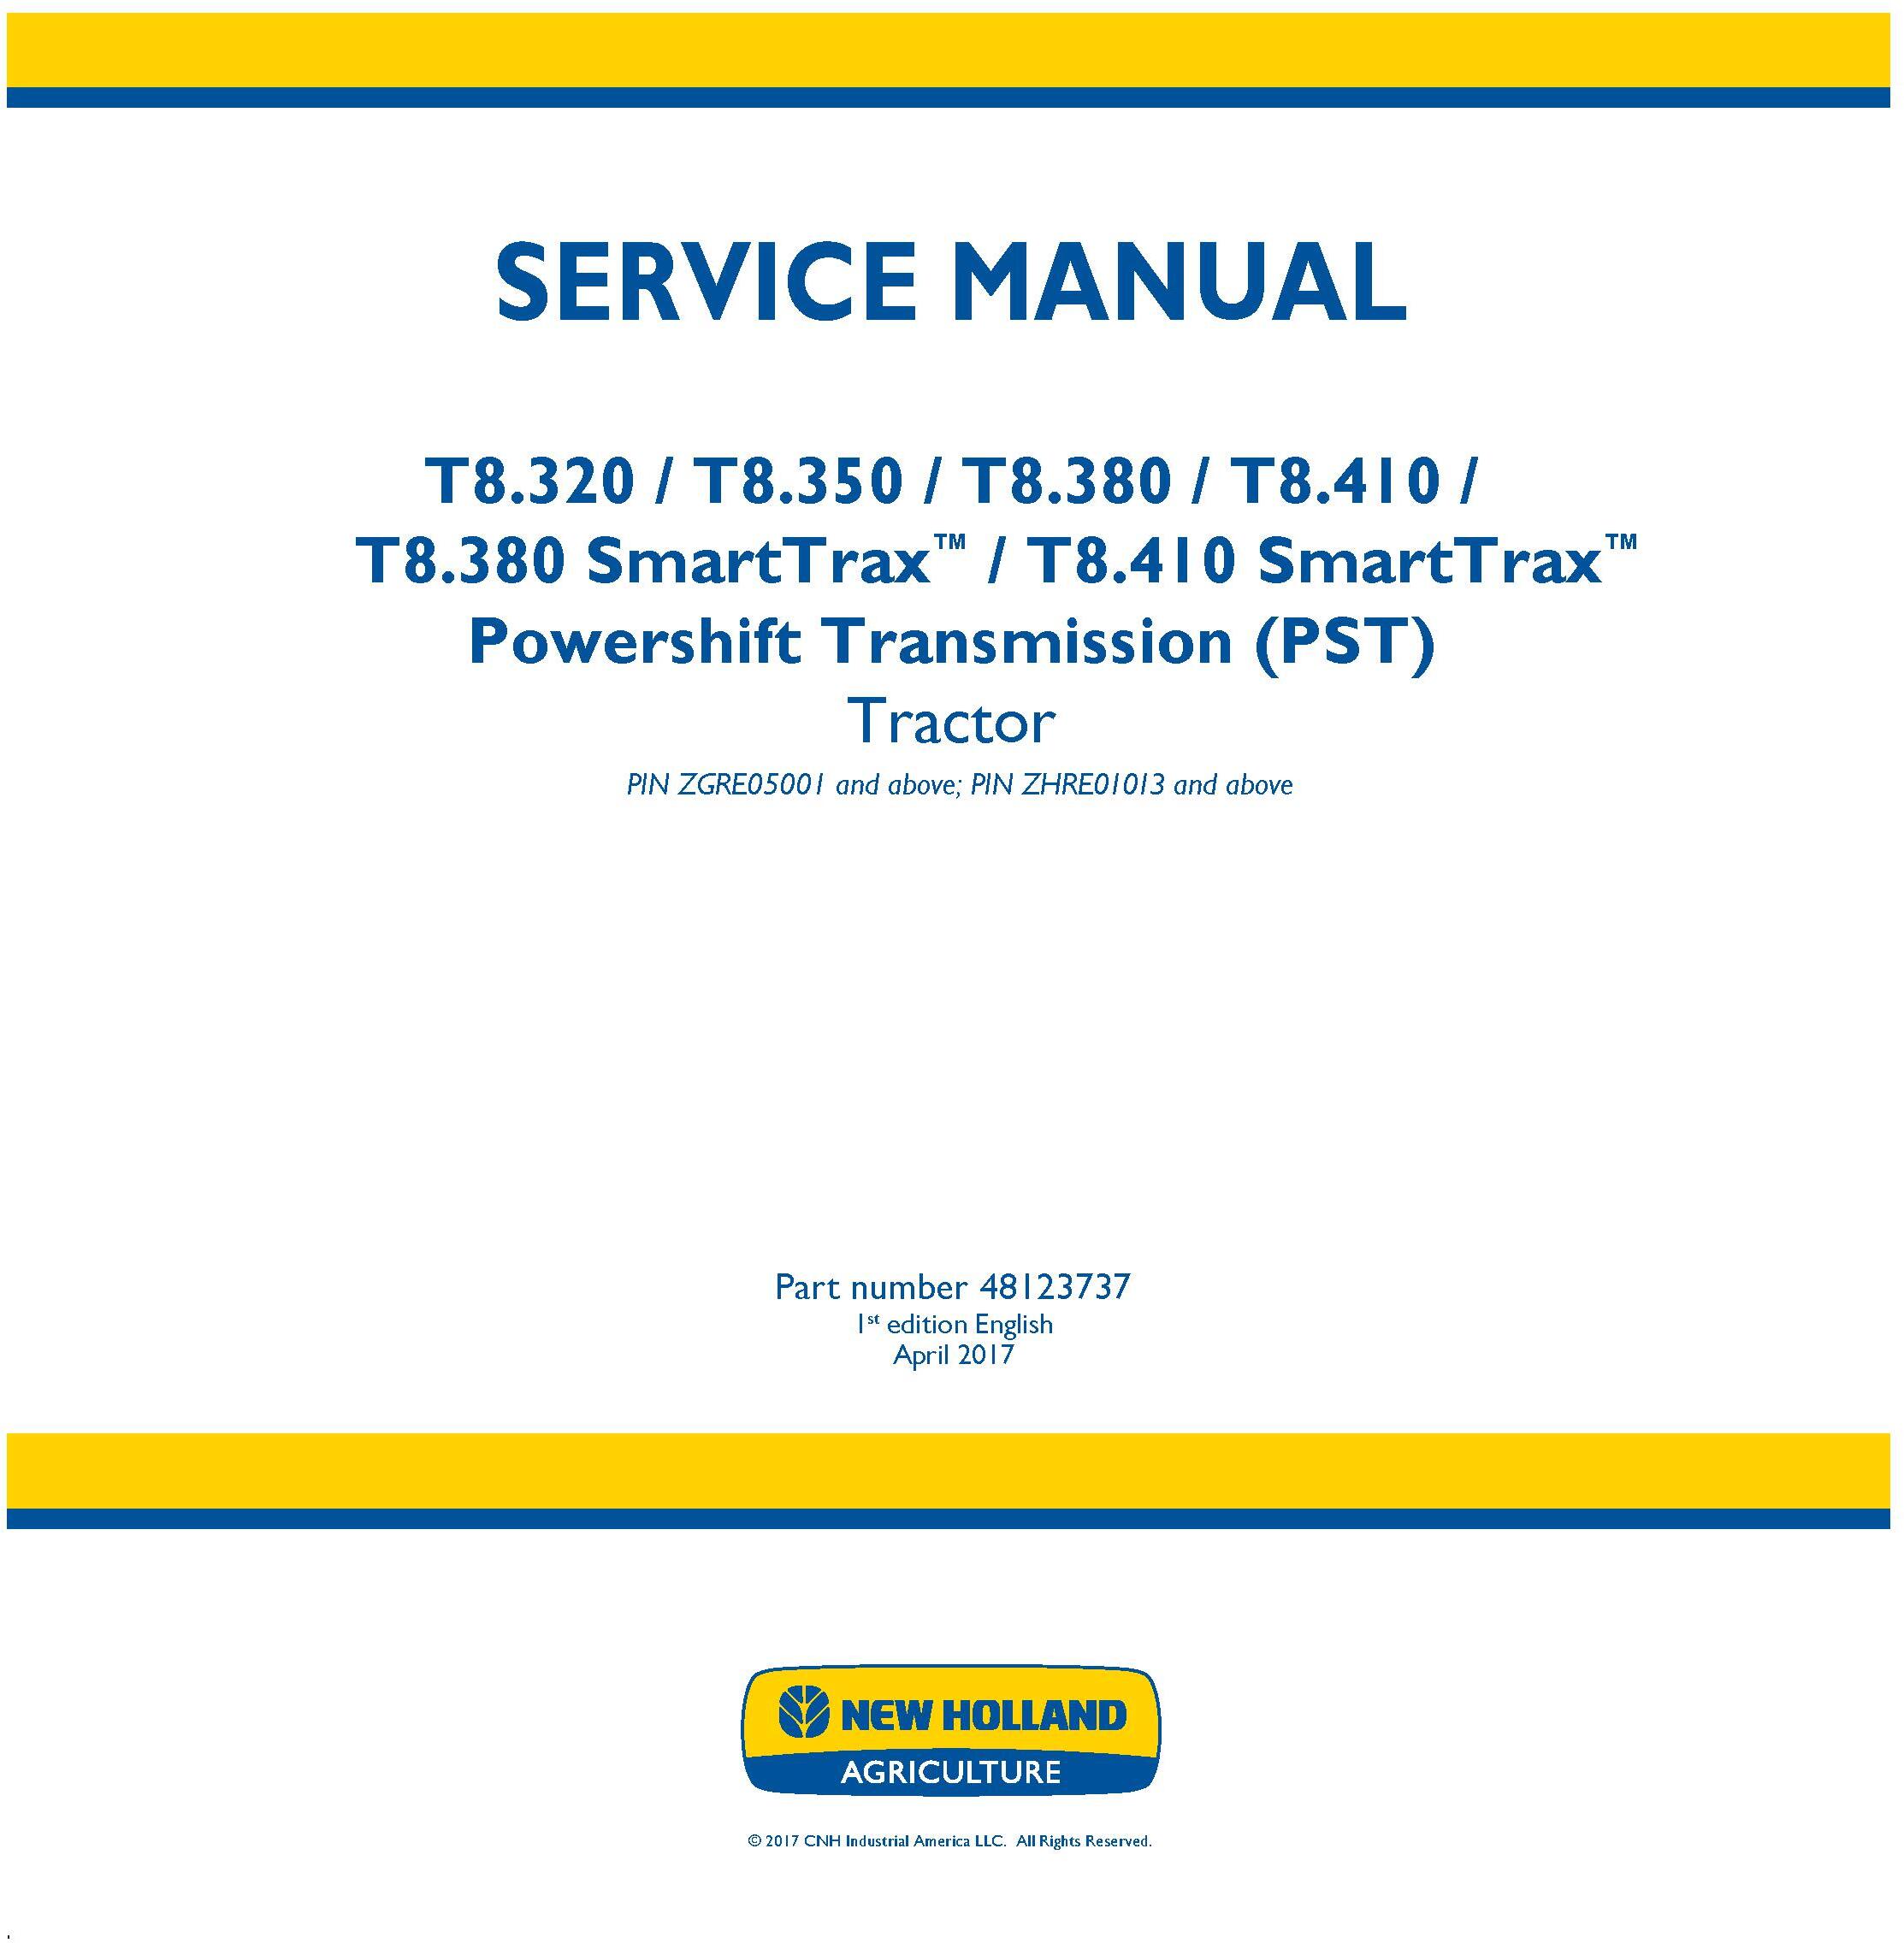 New Holland T8.320, T8.350, T8.380, T8.410 and SmartTrax, Tier 2 with PST Tractor Service Manual - 19497